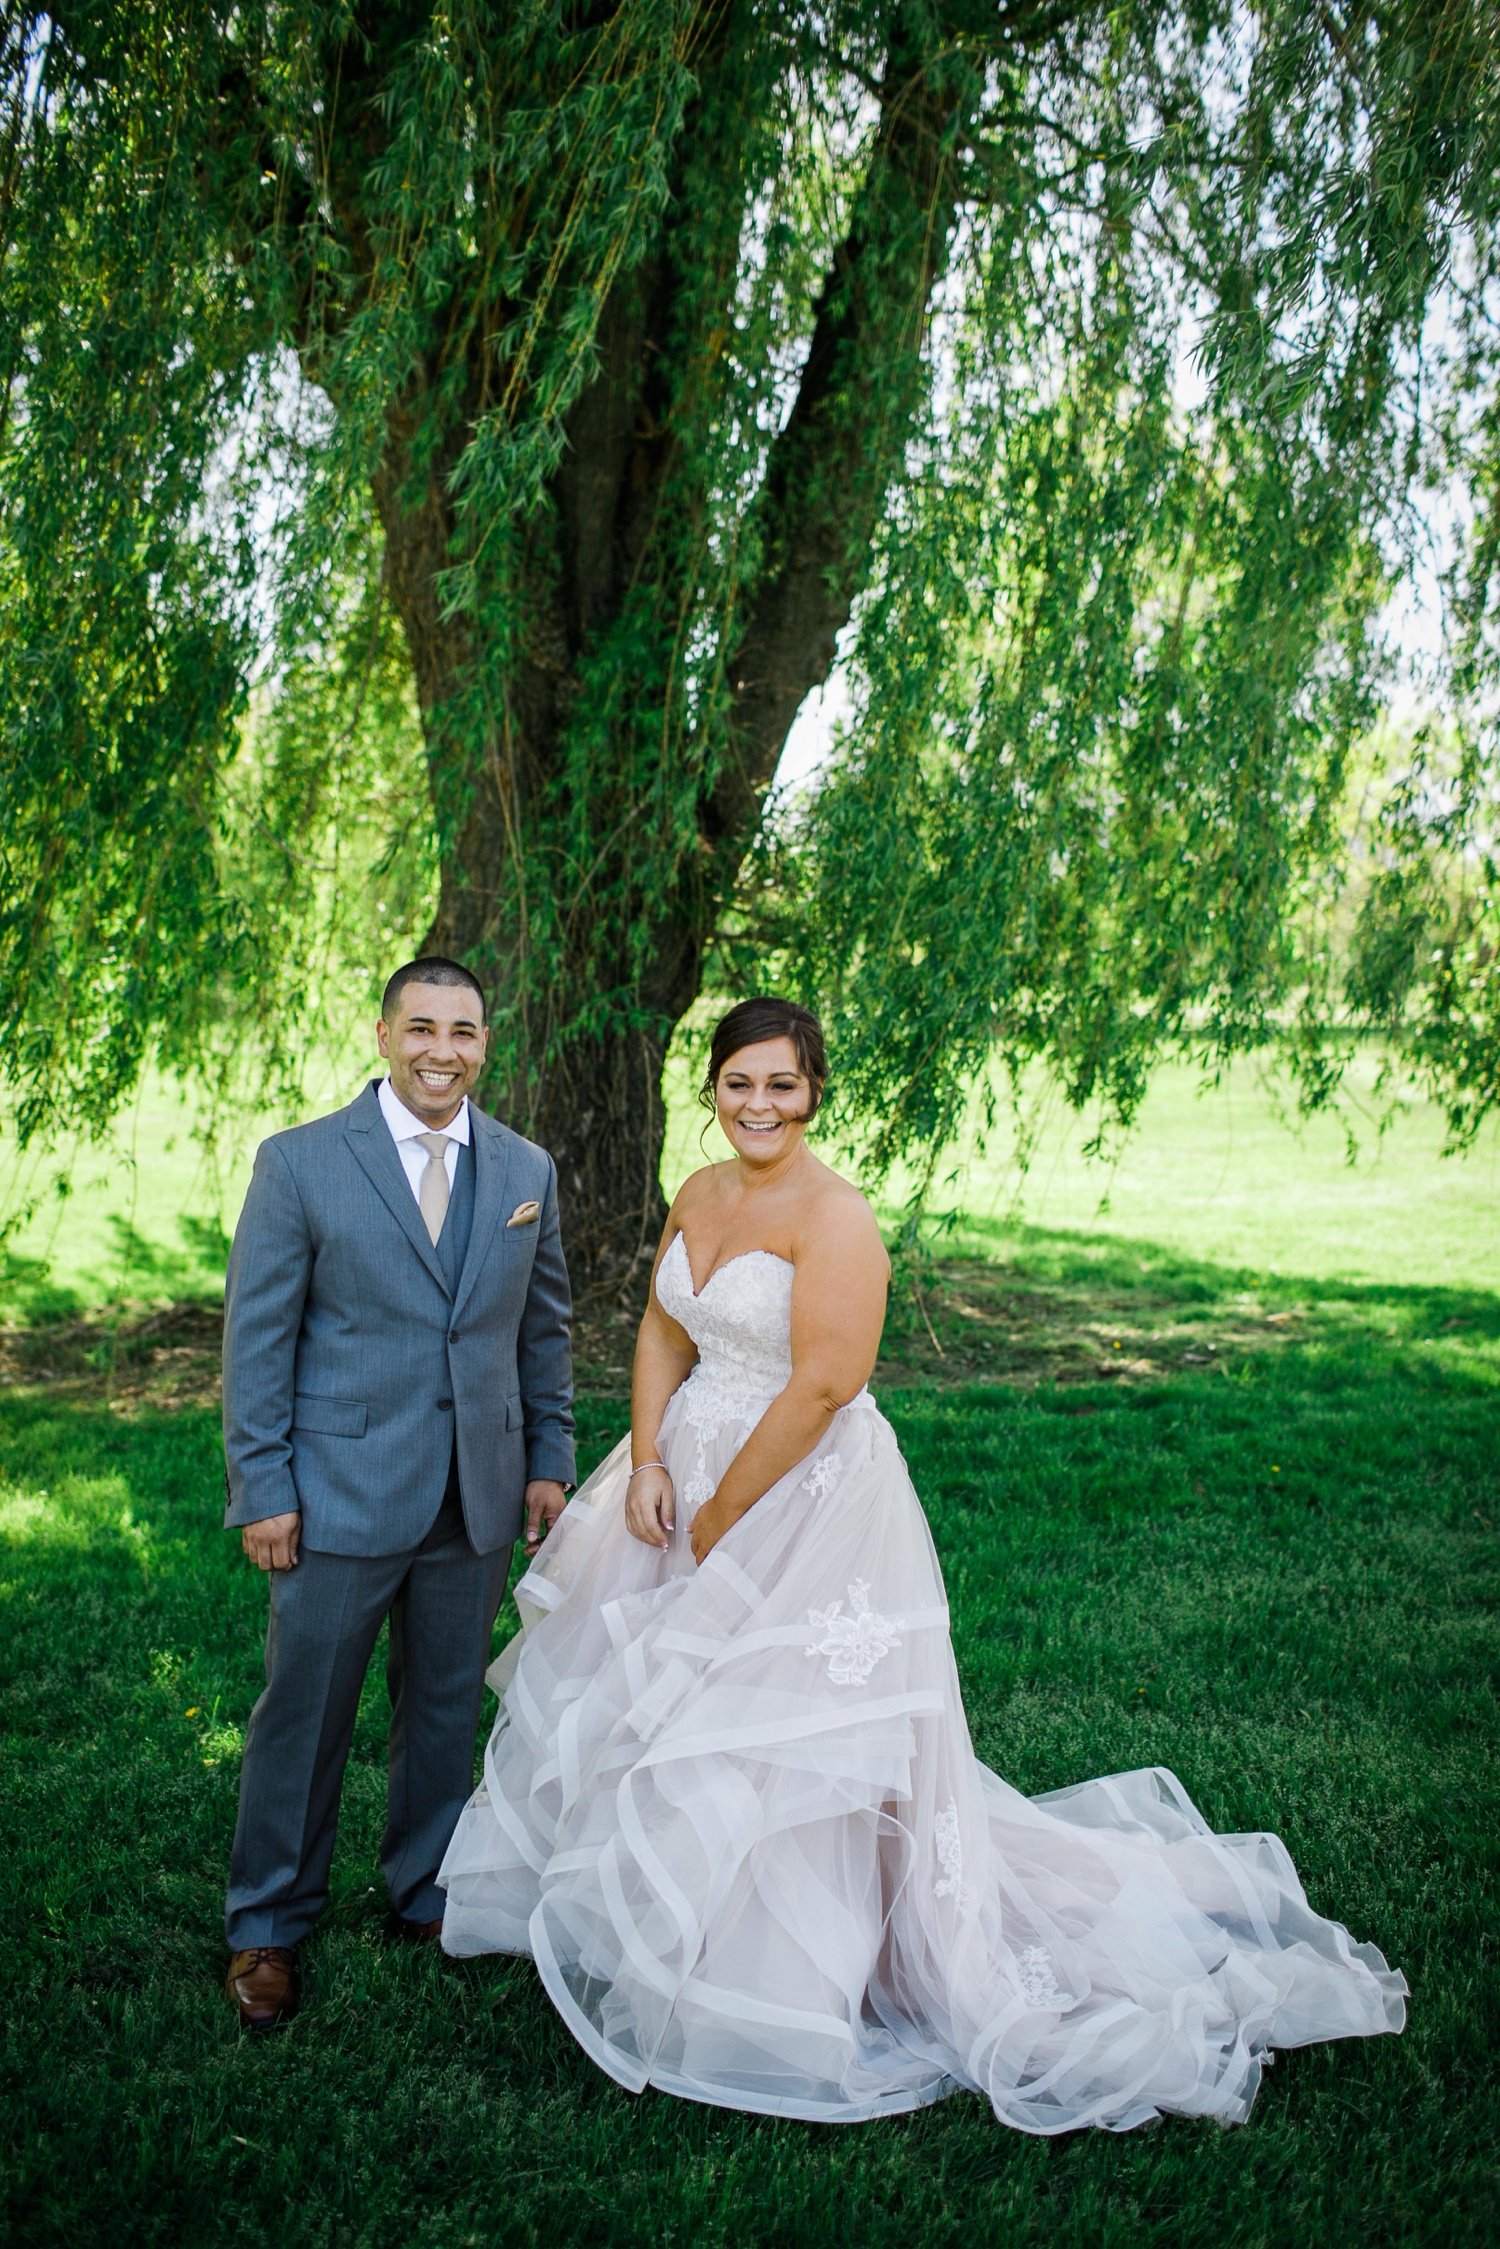 07_First look on a wedding day at Otterkill Golf and Country Club by Sweet Alice Photography.jpg